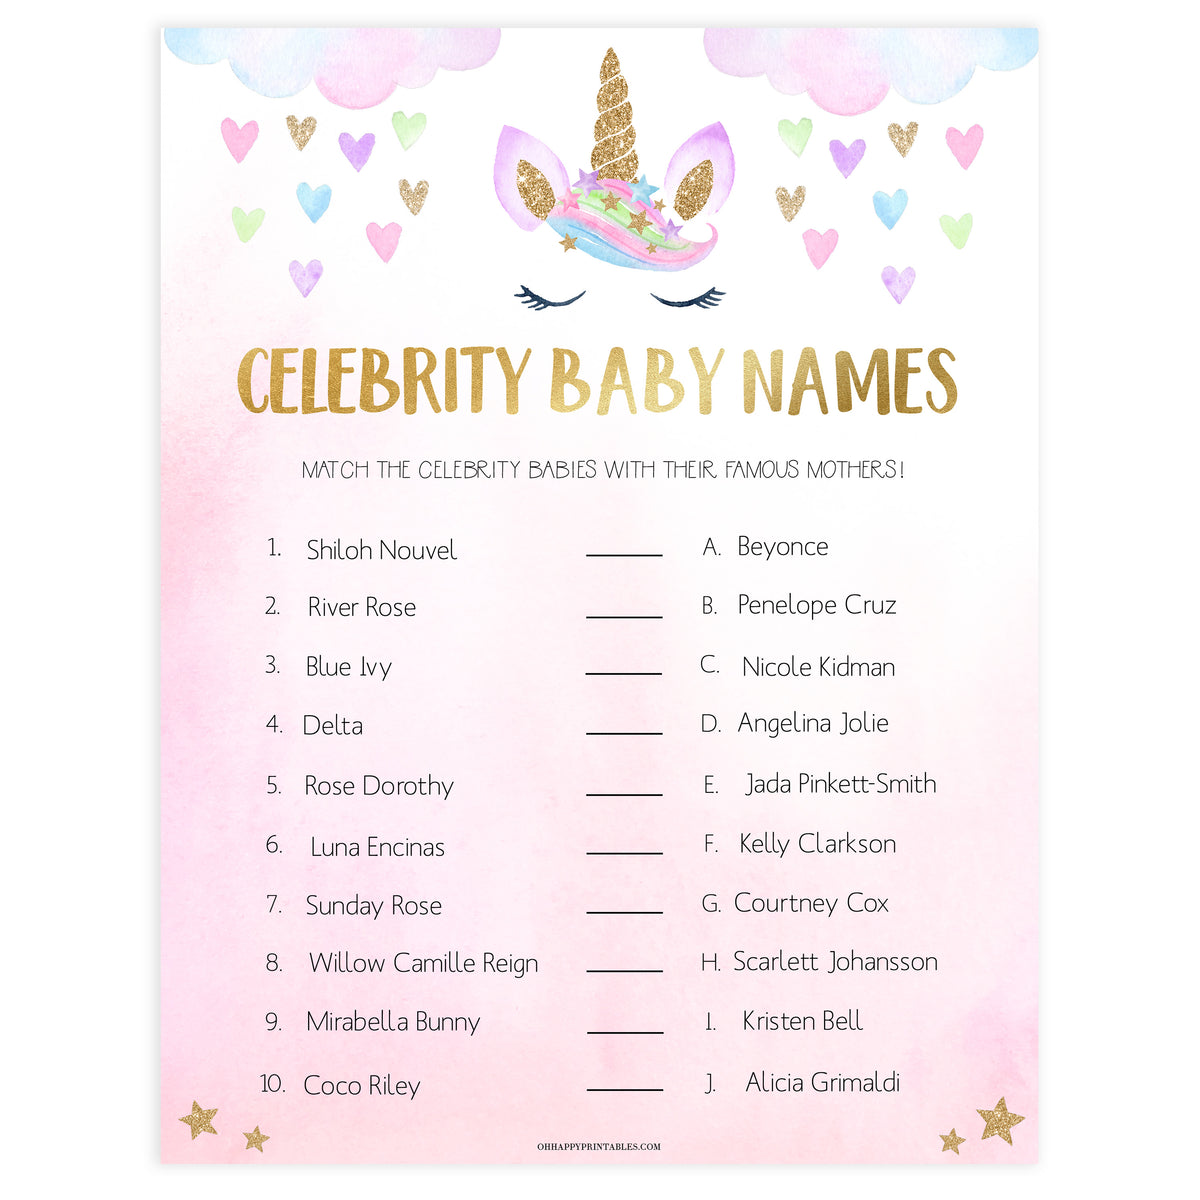 celebrity baby names game, Printable baby shower games, unicorn baby games, baby shower games, fun baby shower ideas, top baby shower ideas, unicorn baby shower, baby shower games, fun unicorn baby shower ideas